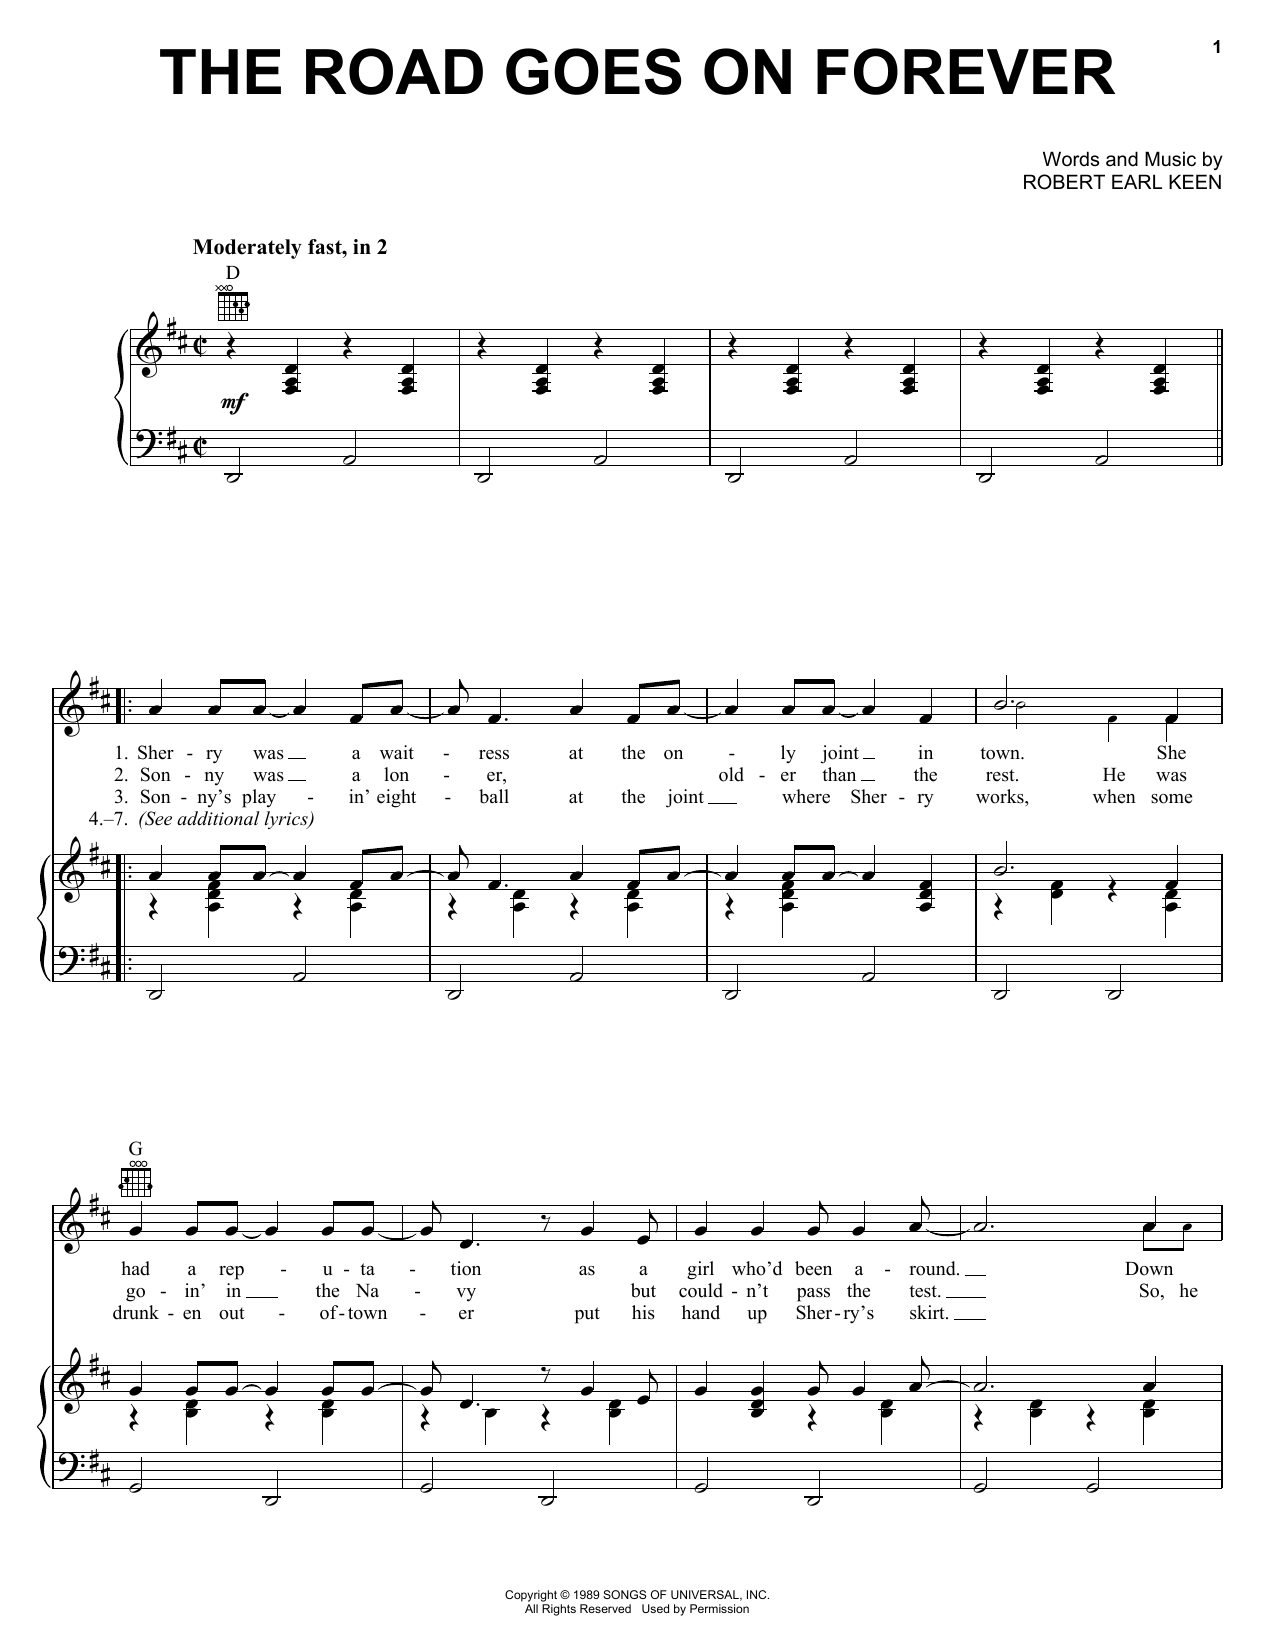 Download Robert Earl Keen The Road Goes On Forever Sheet Music